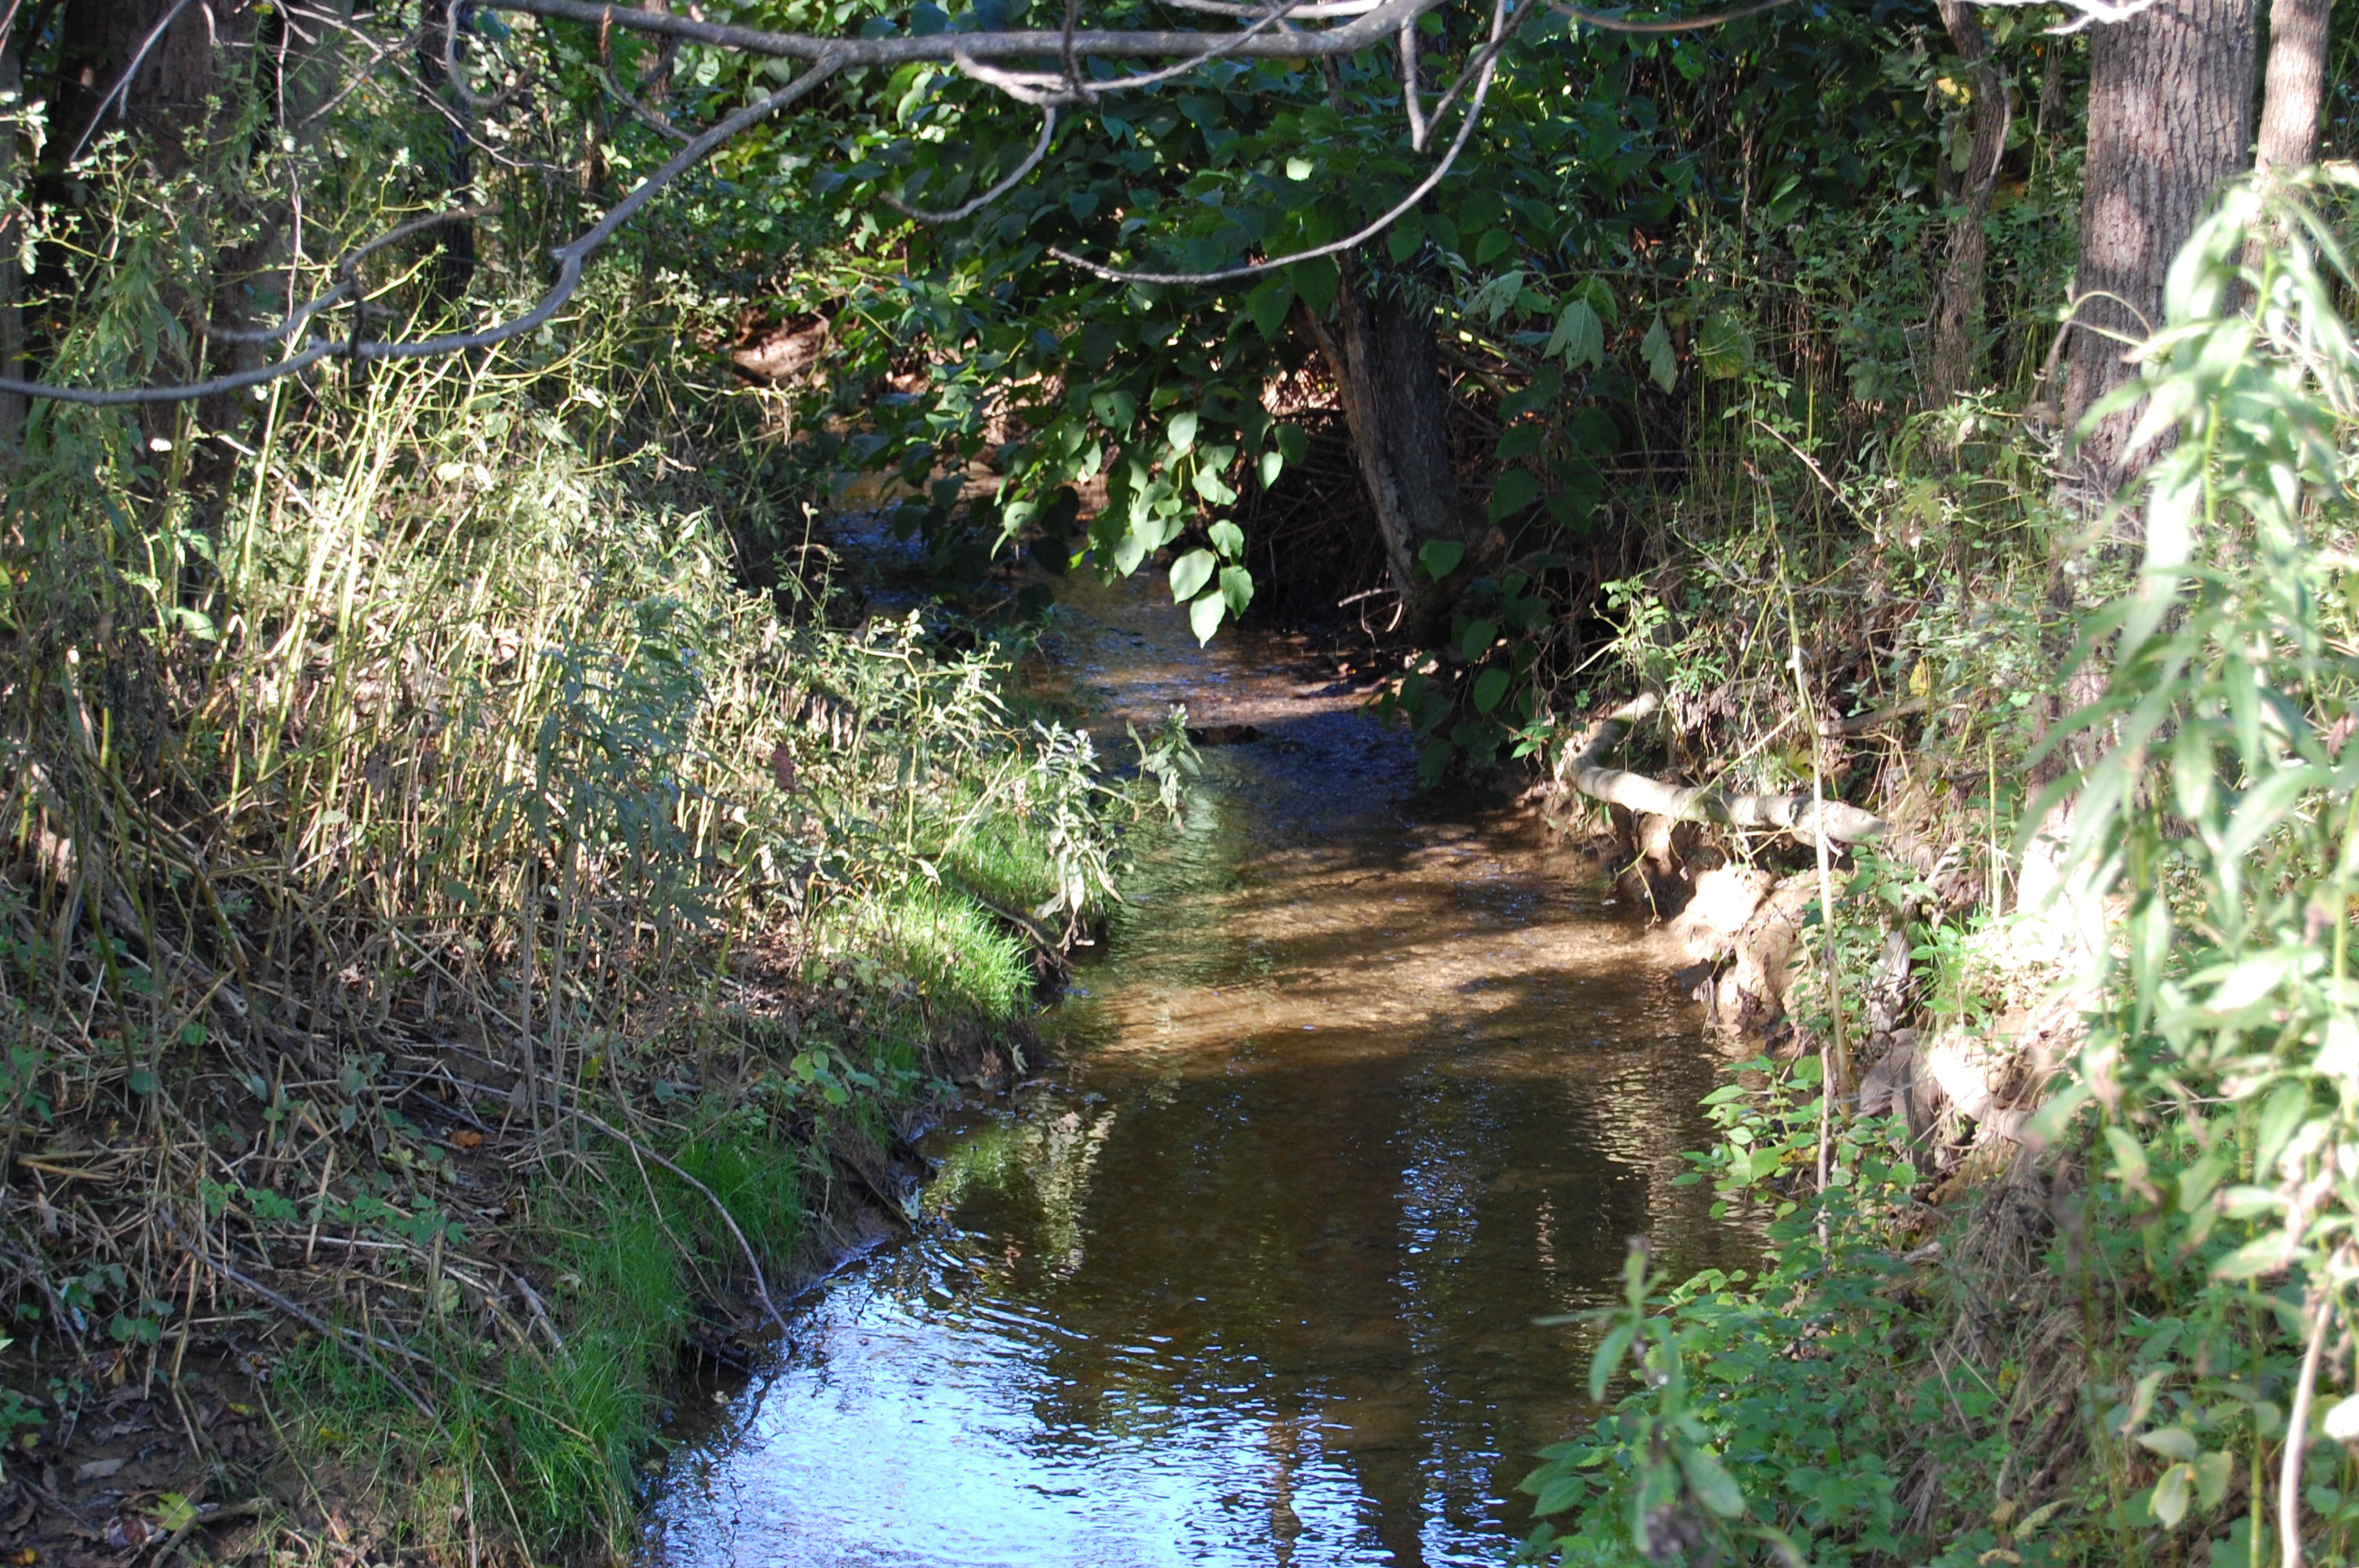 A small river running through tall grass in a forest